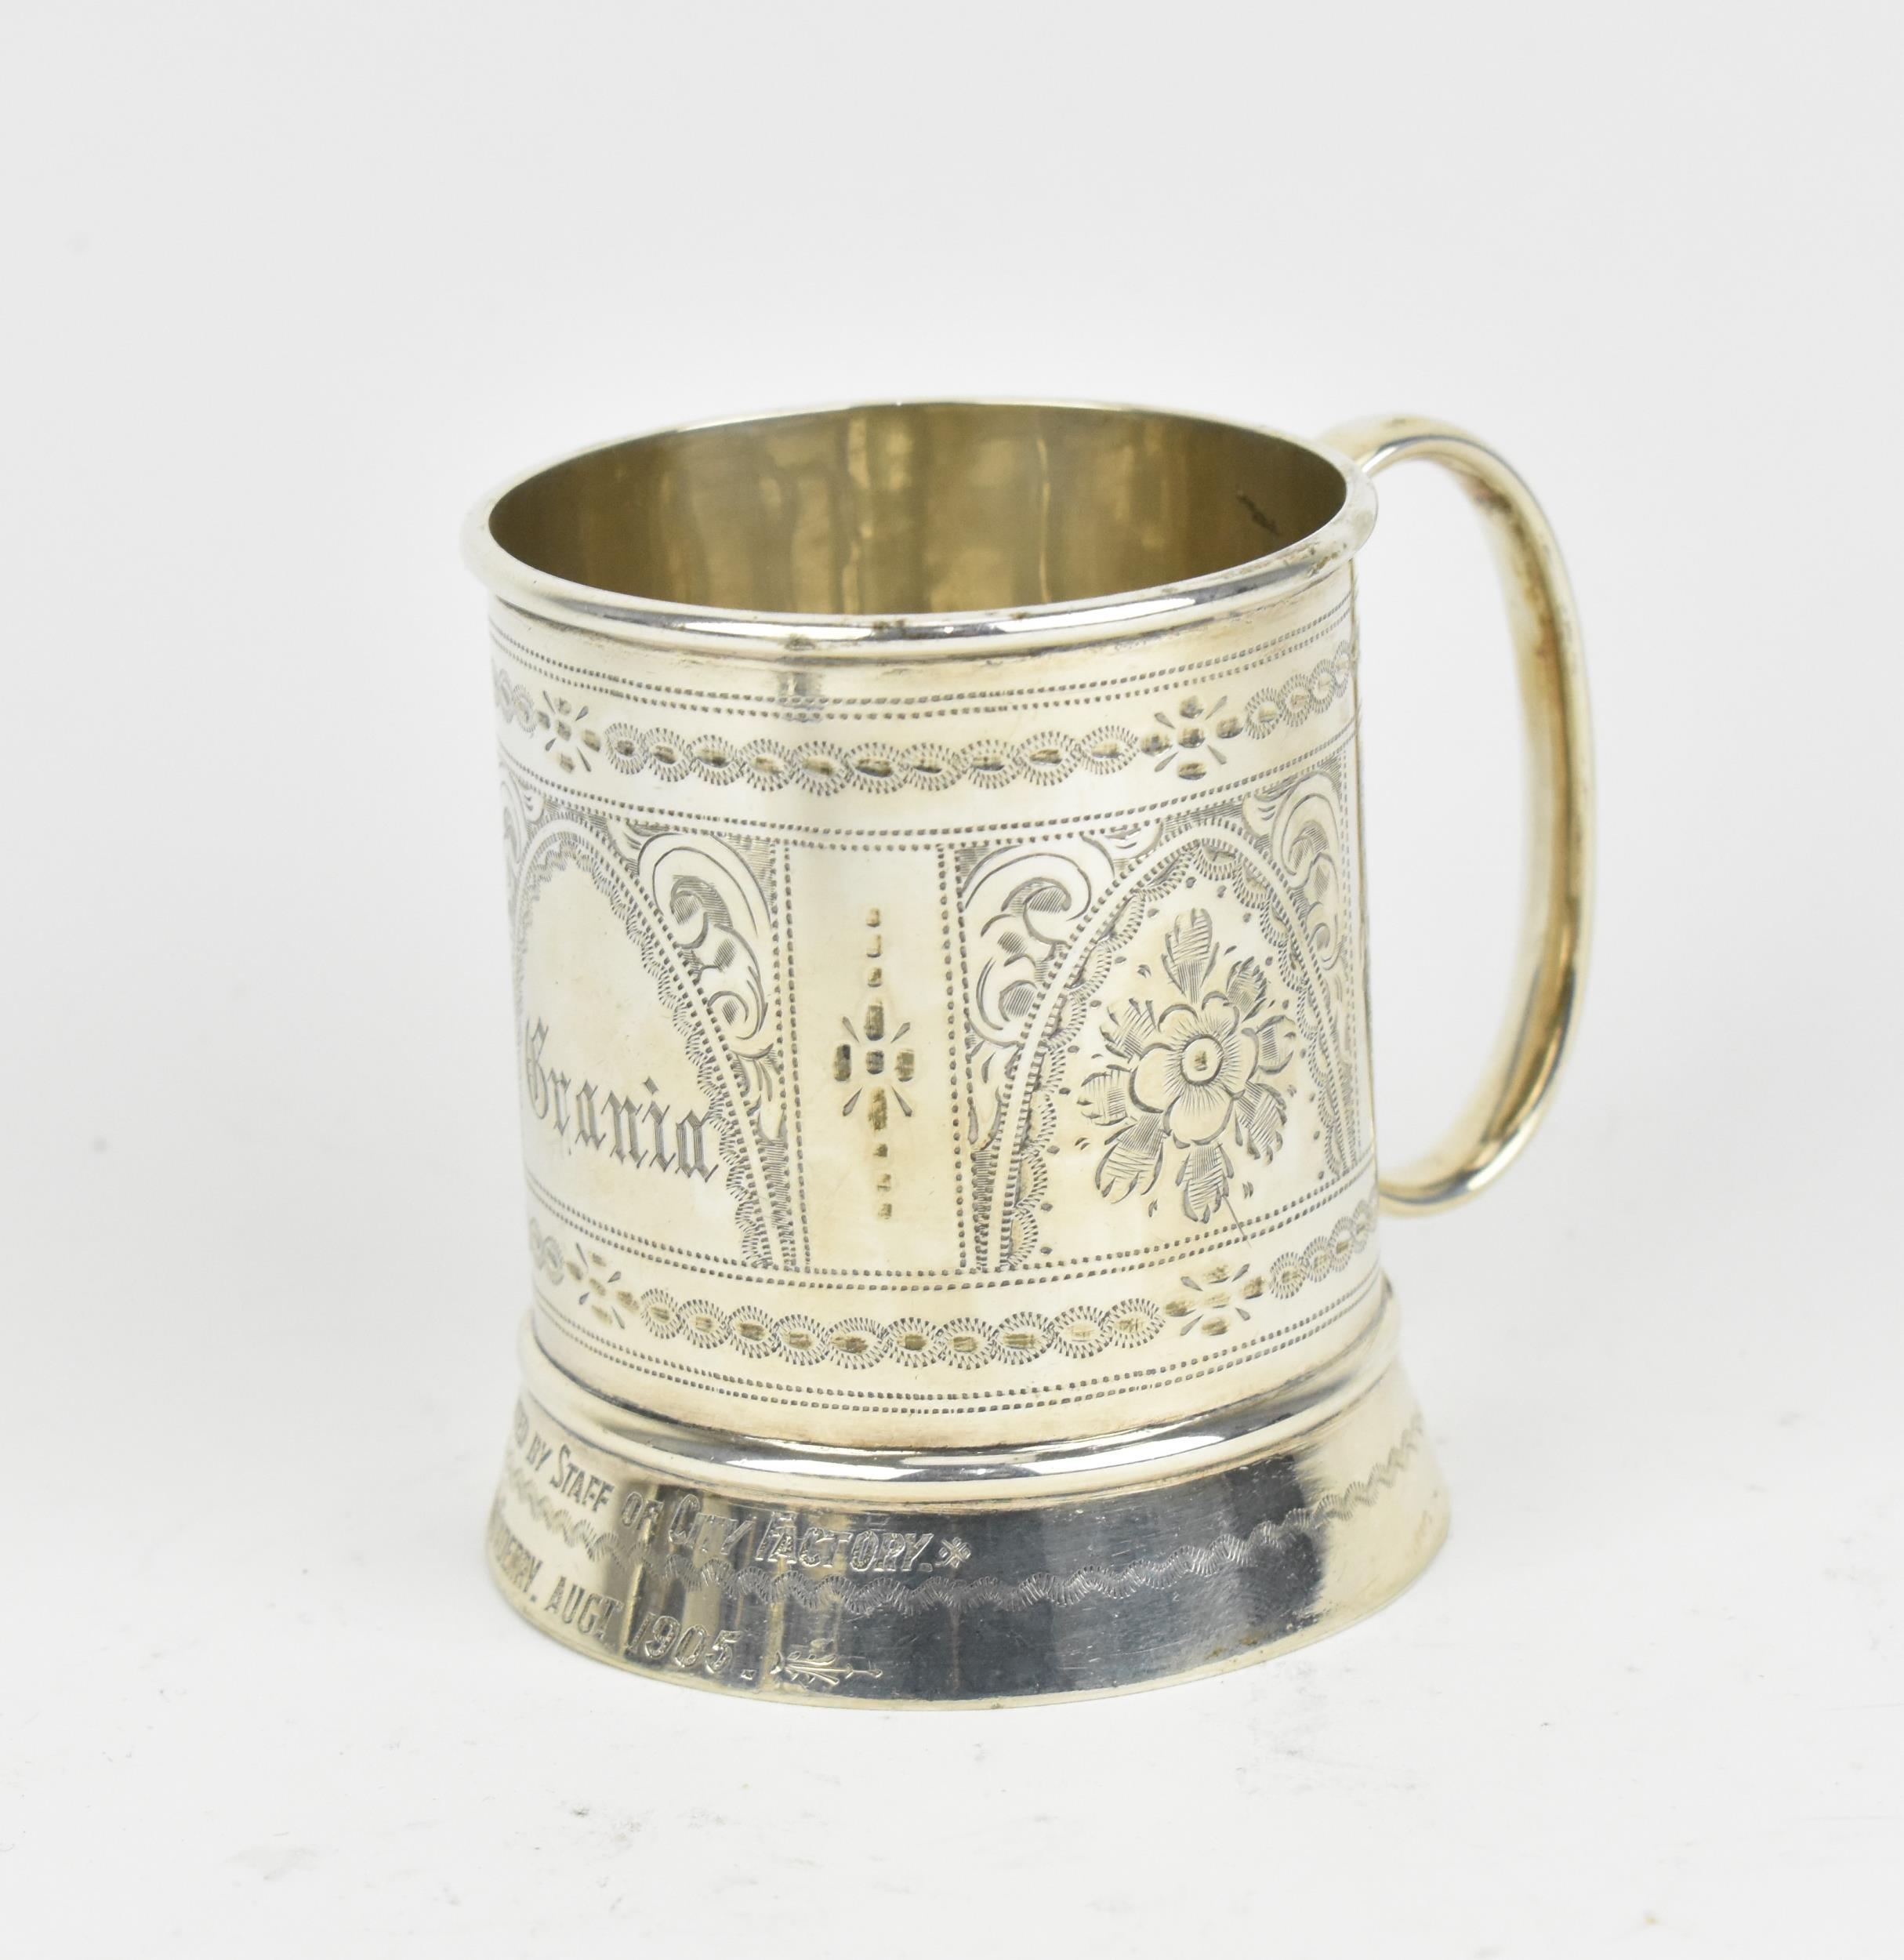 An Edwardian silver christening mug by Cooper Brothers & Sons Ltd, Sheffield 1902, of cylindrical